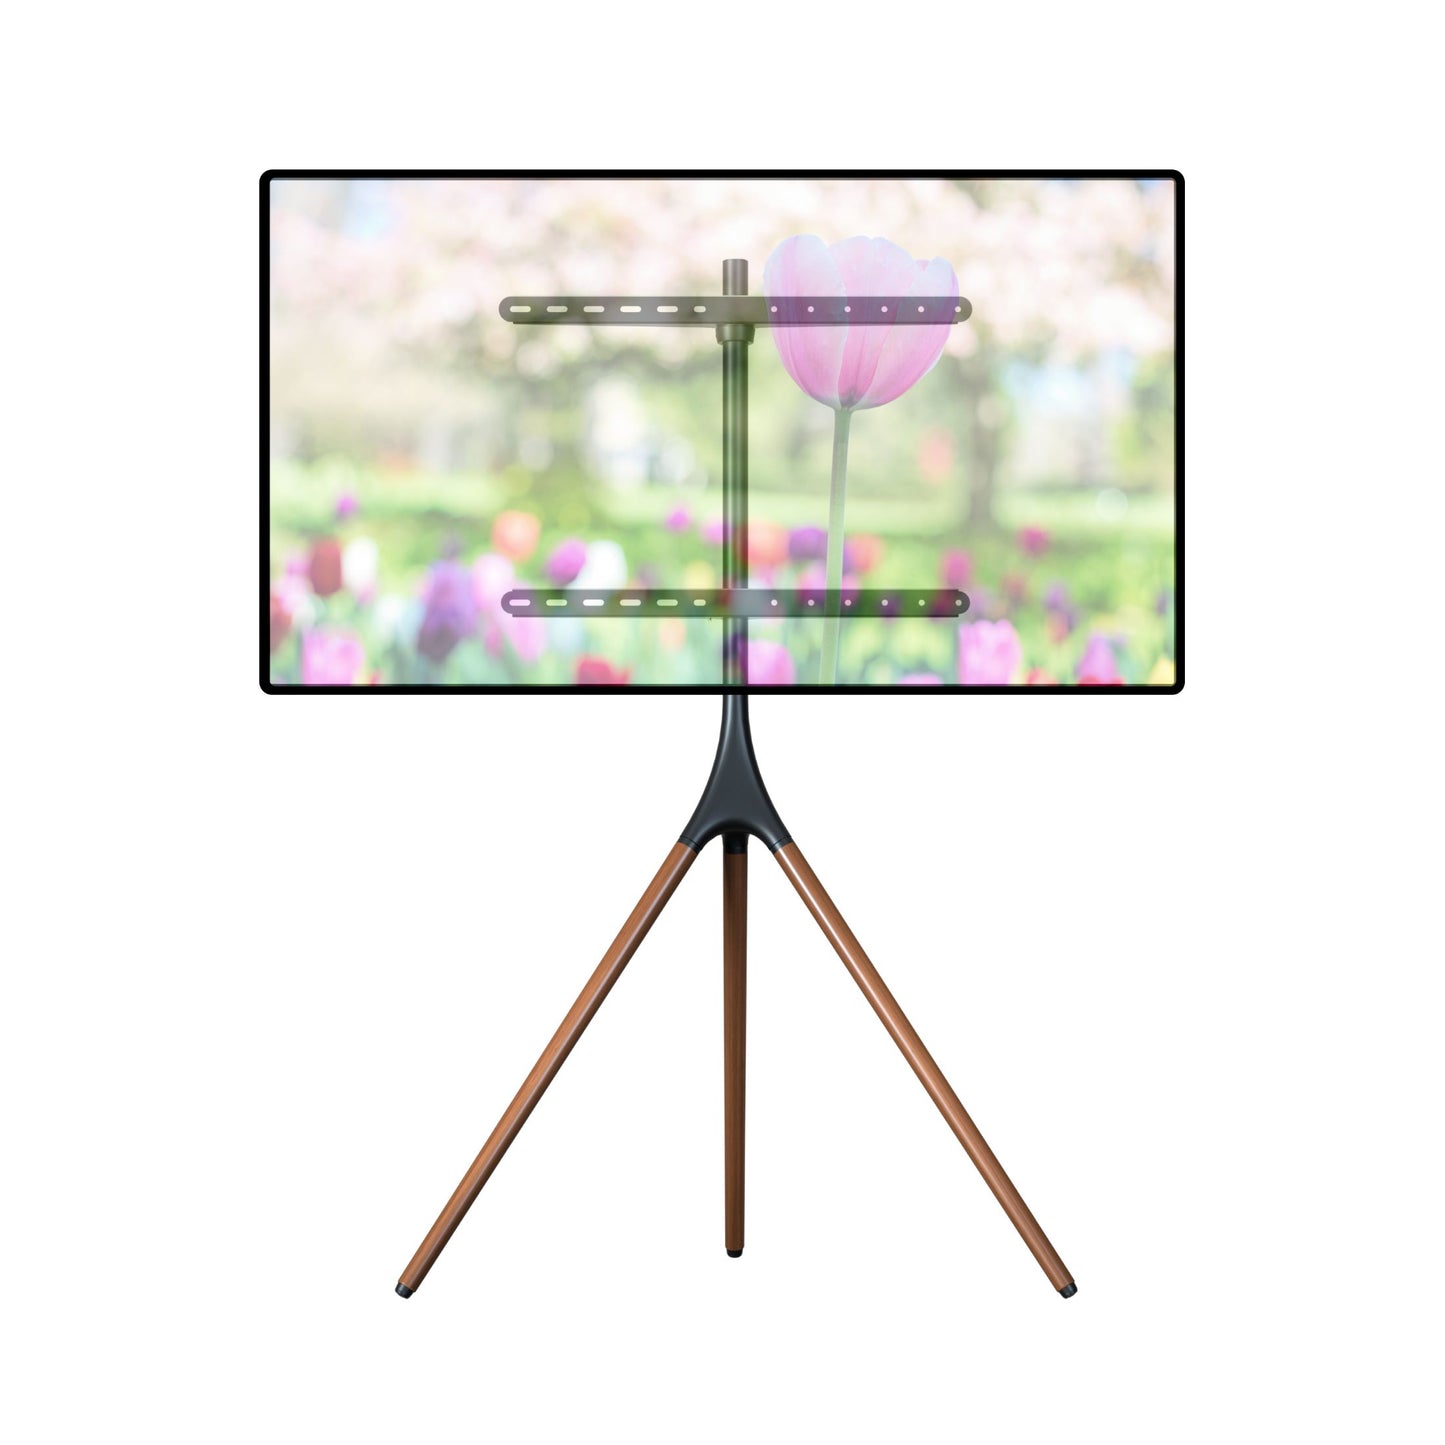 ProMounts Artistic Tripod TV Stand Mount for 47”-72” Screens, Holds up to 55lbs (AFMSS6401)